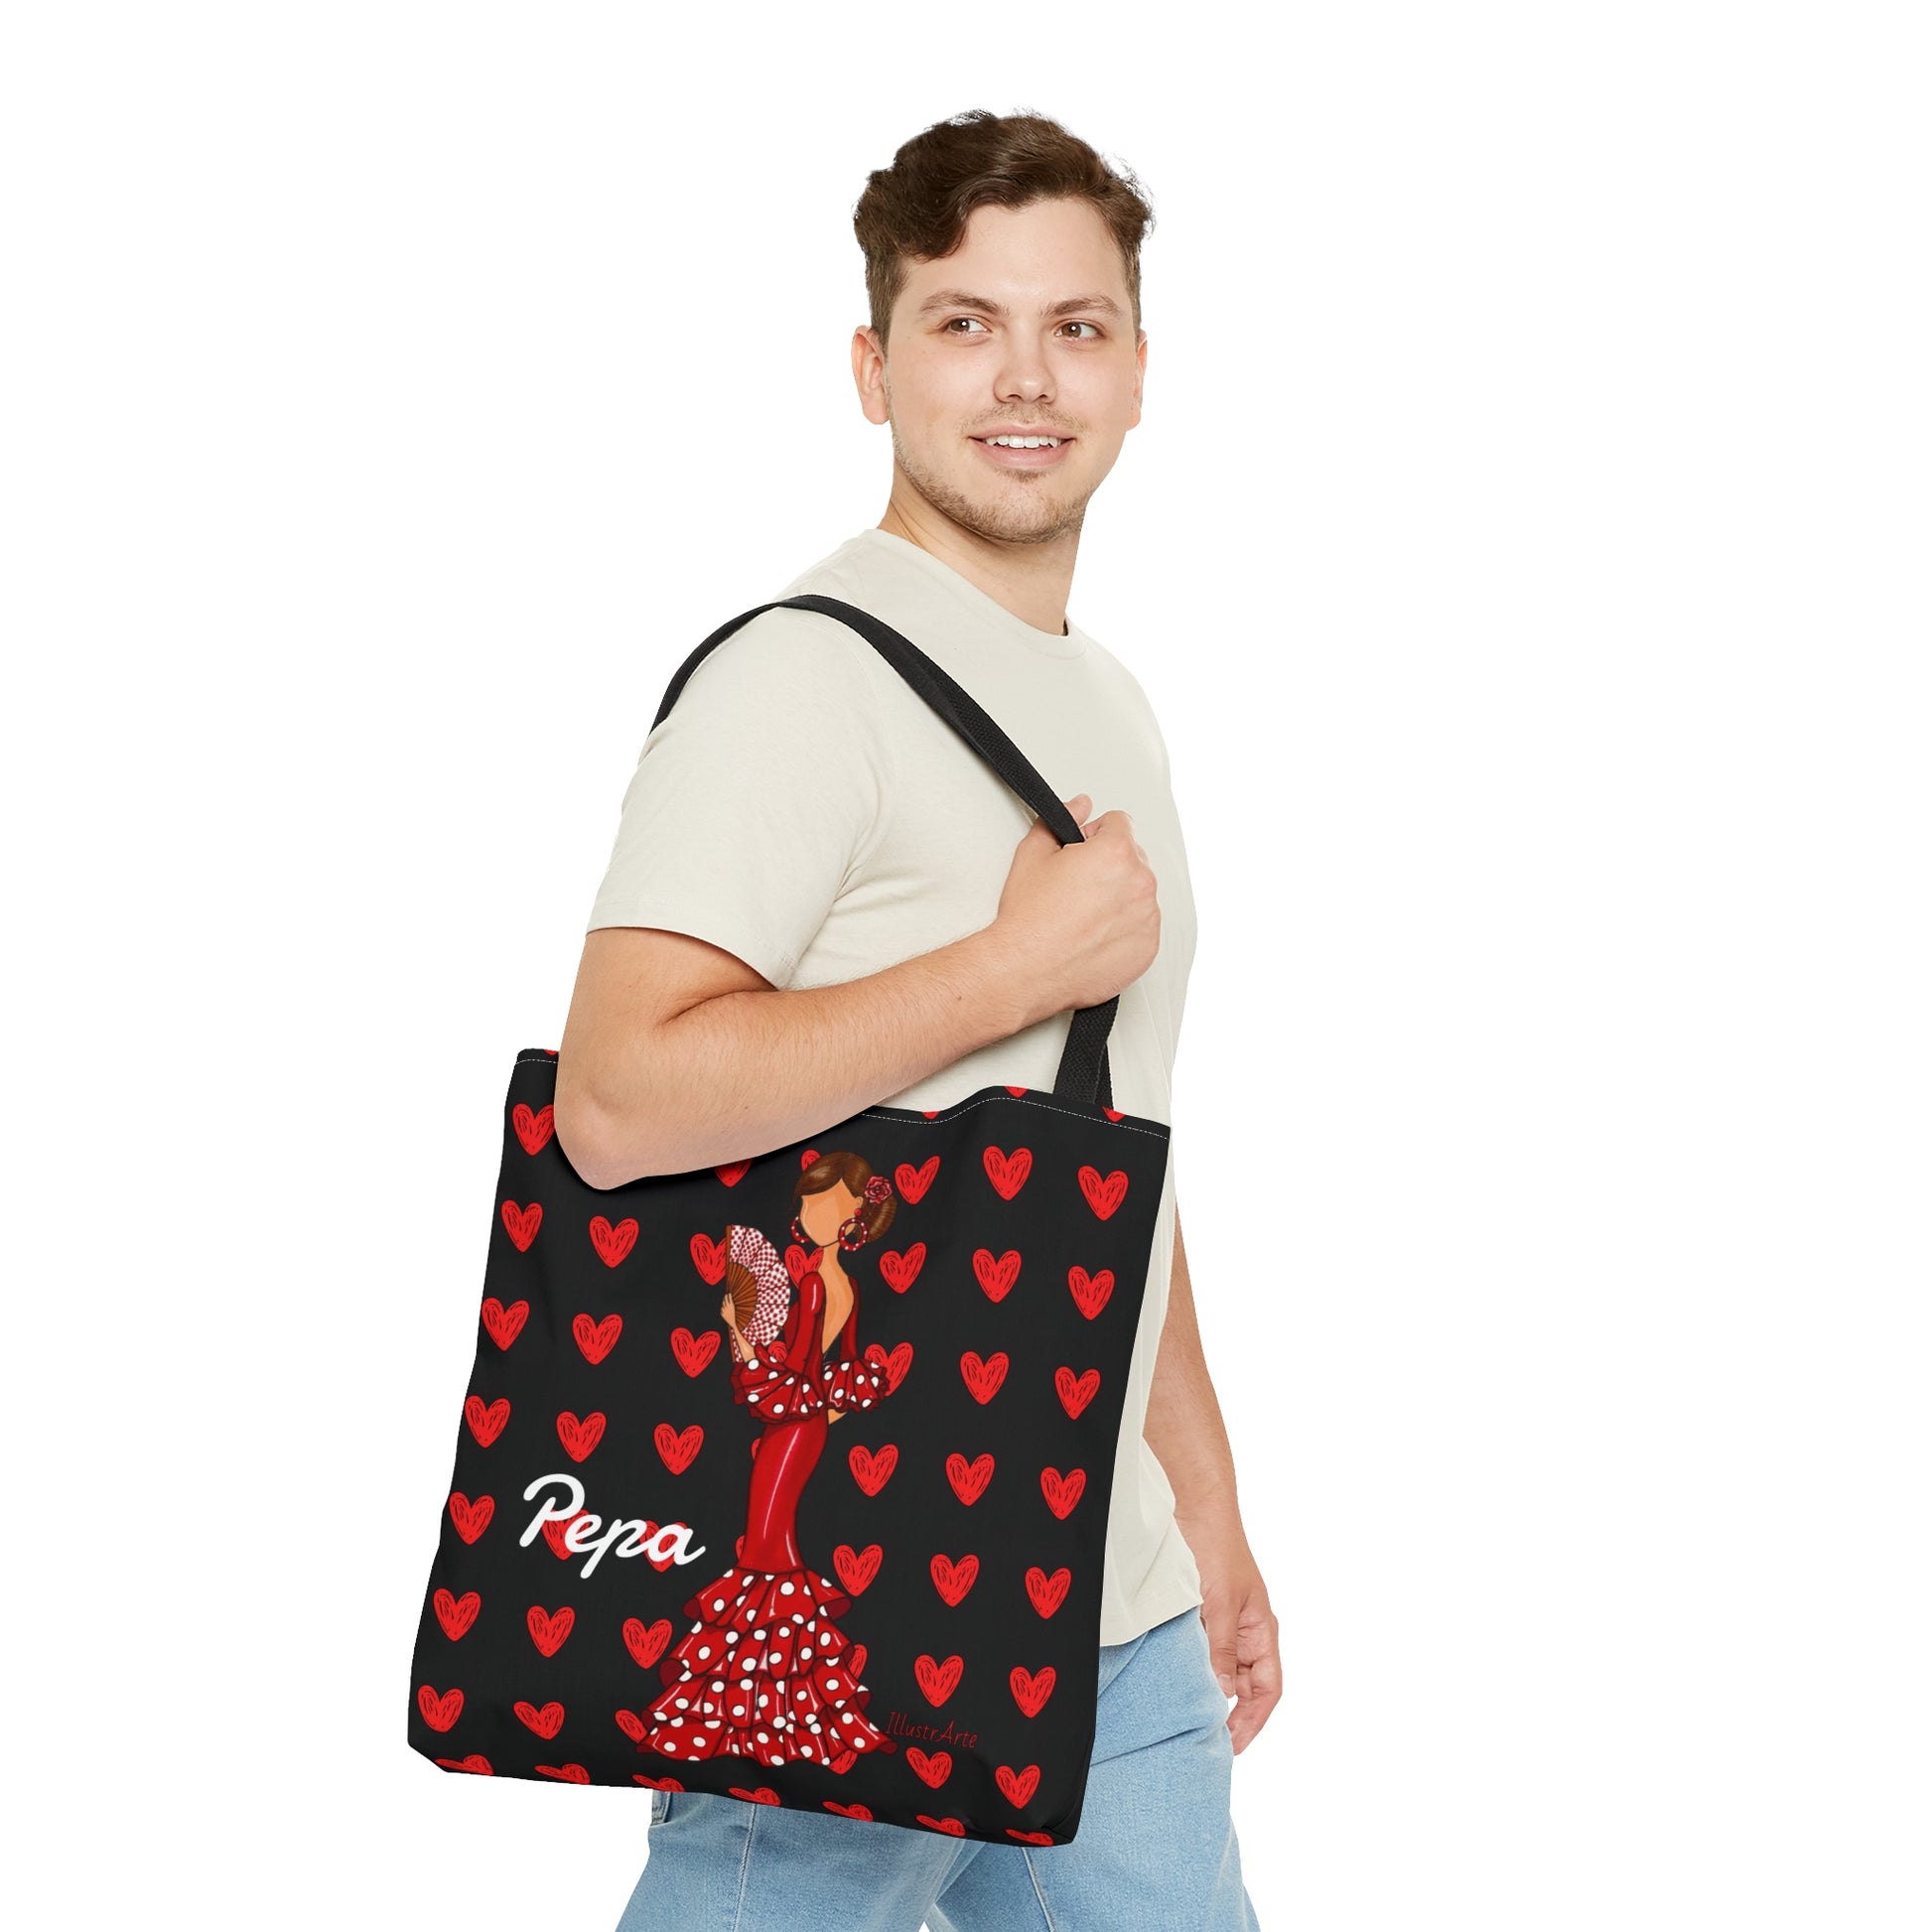 a man is holding a bag with hearts on it